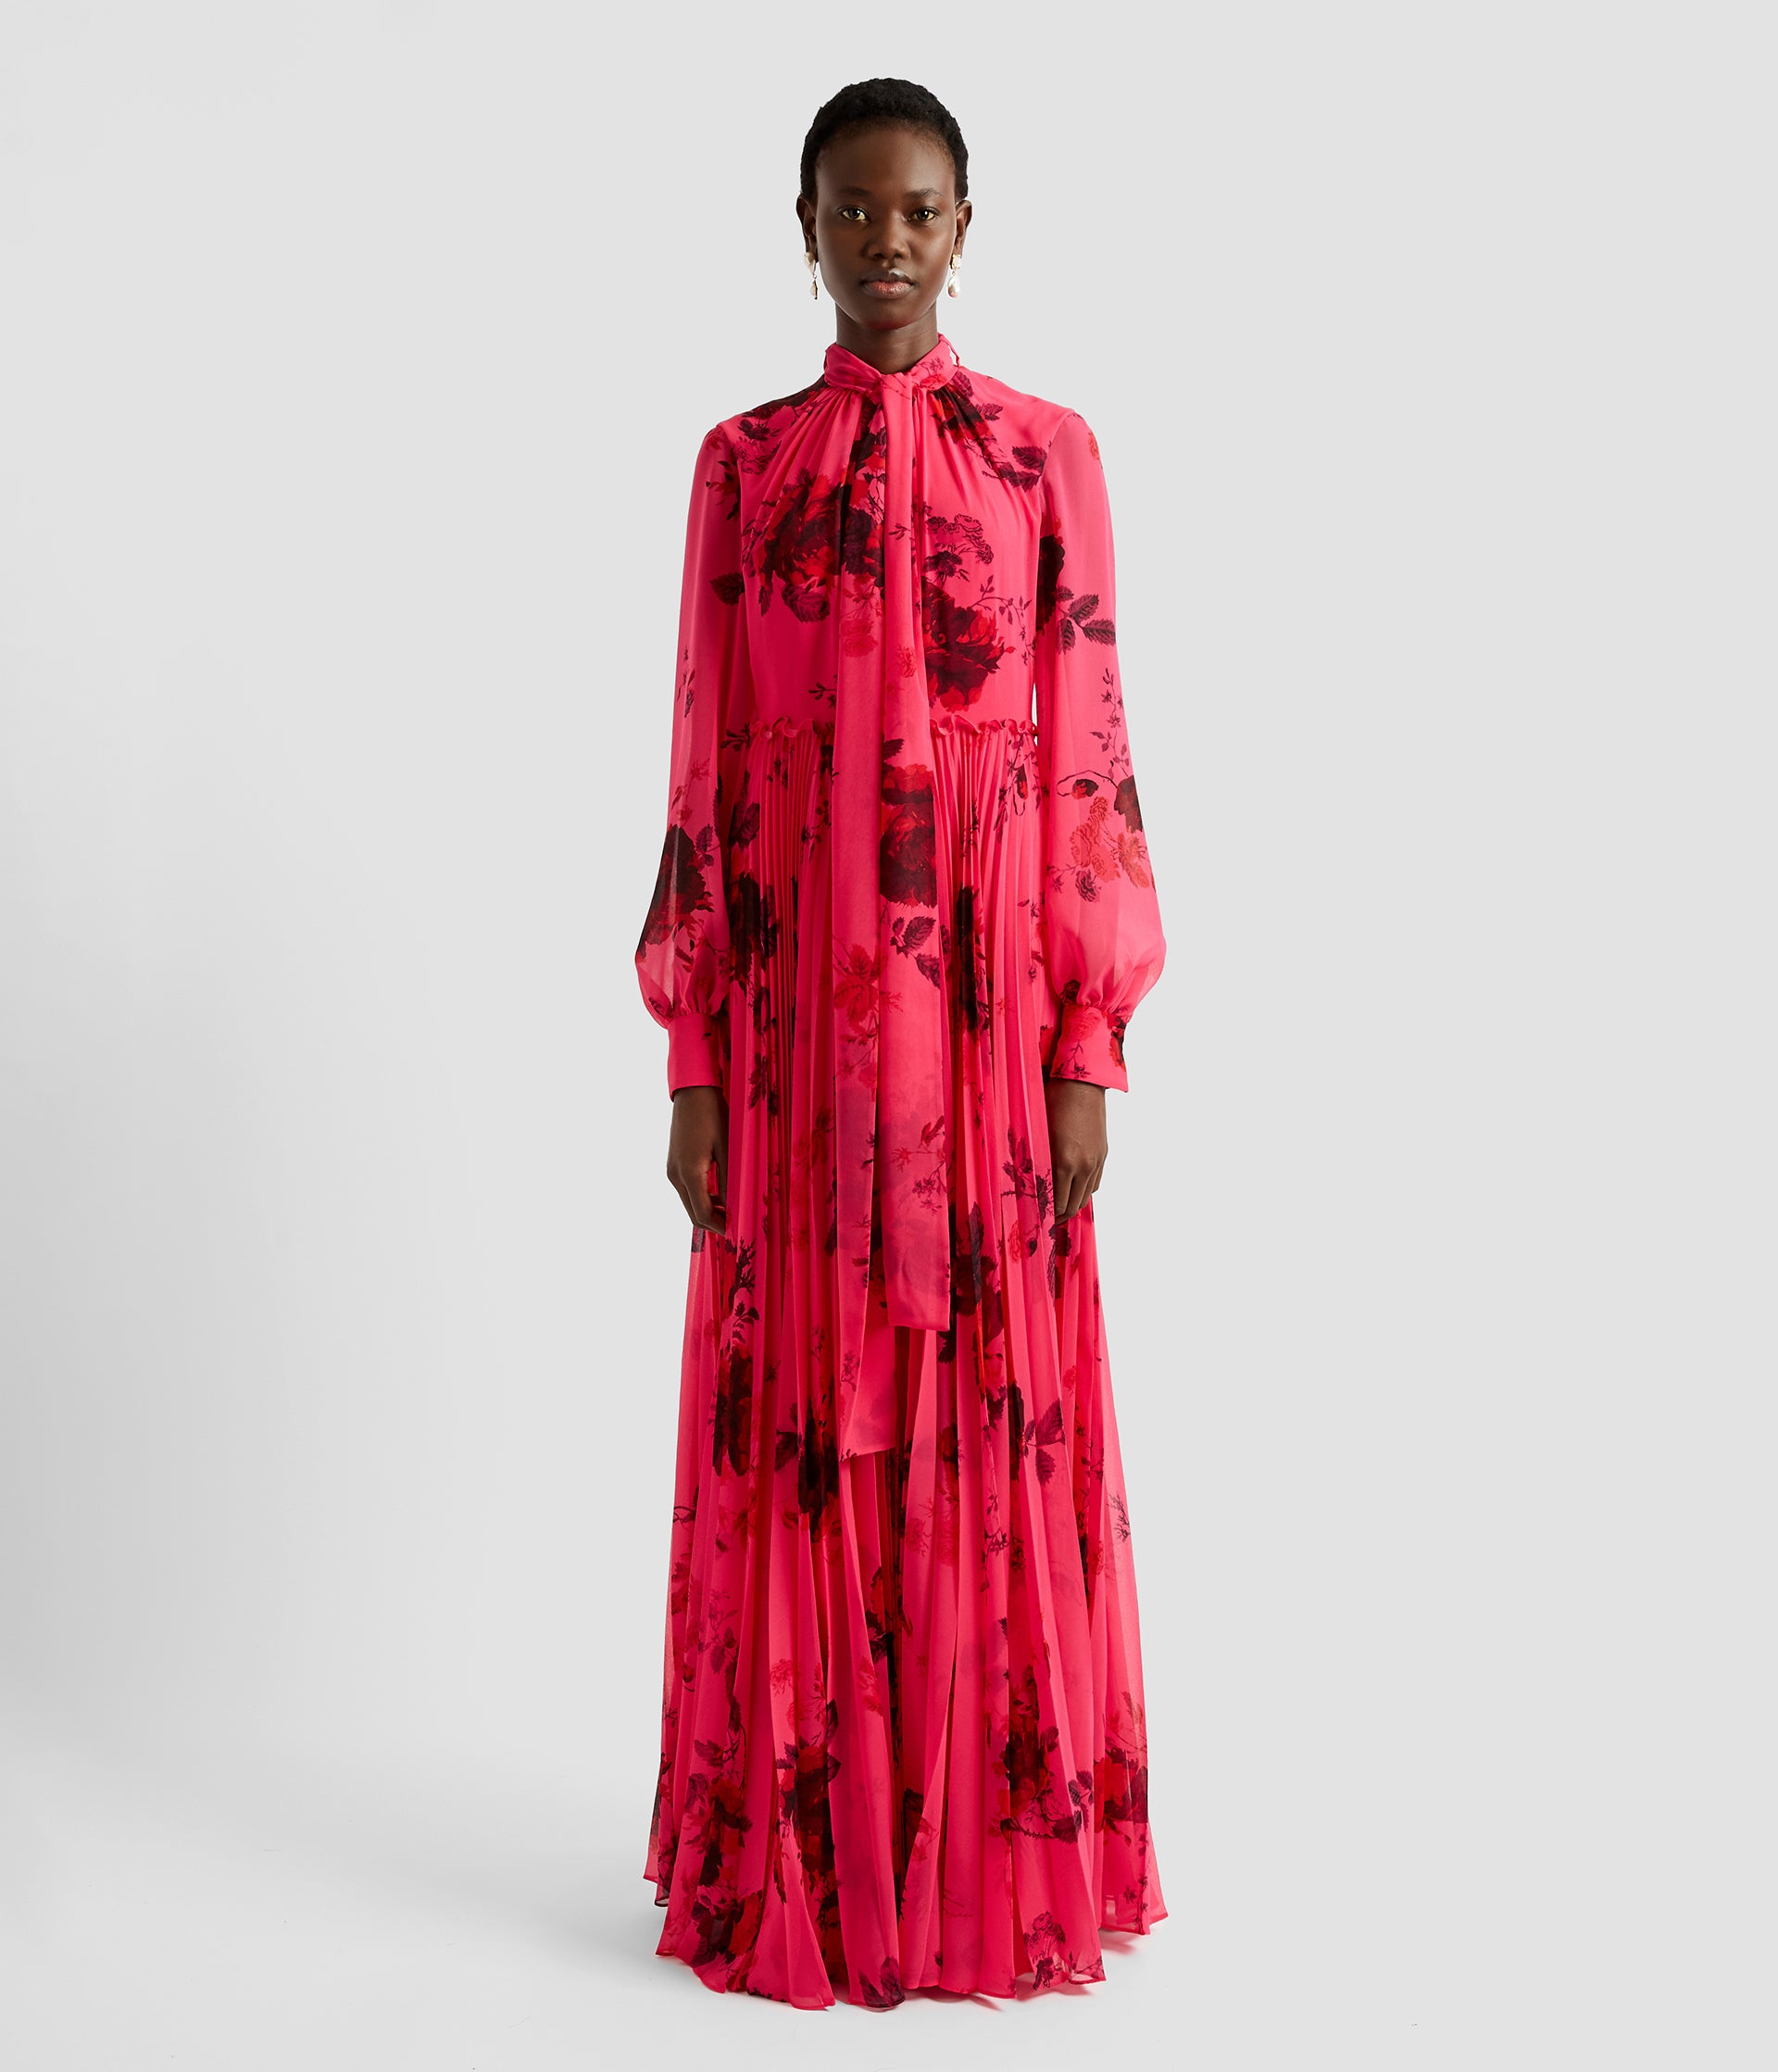 This vibrant blouson gown with sleeves is made from pleated voile which creates a stunning sense of volume. The fabric is bright cerise and features a dark floral. The sleeves are full length and the neck features a tie closure. 